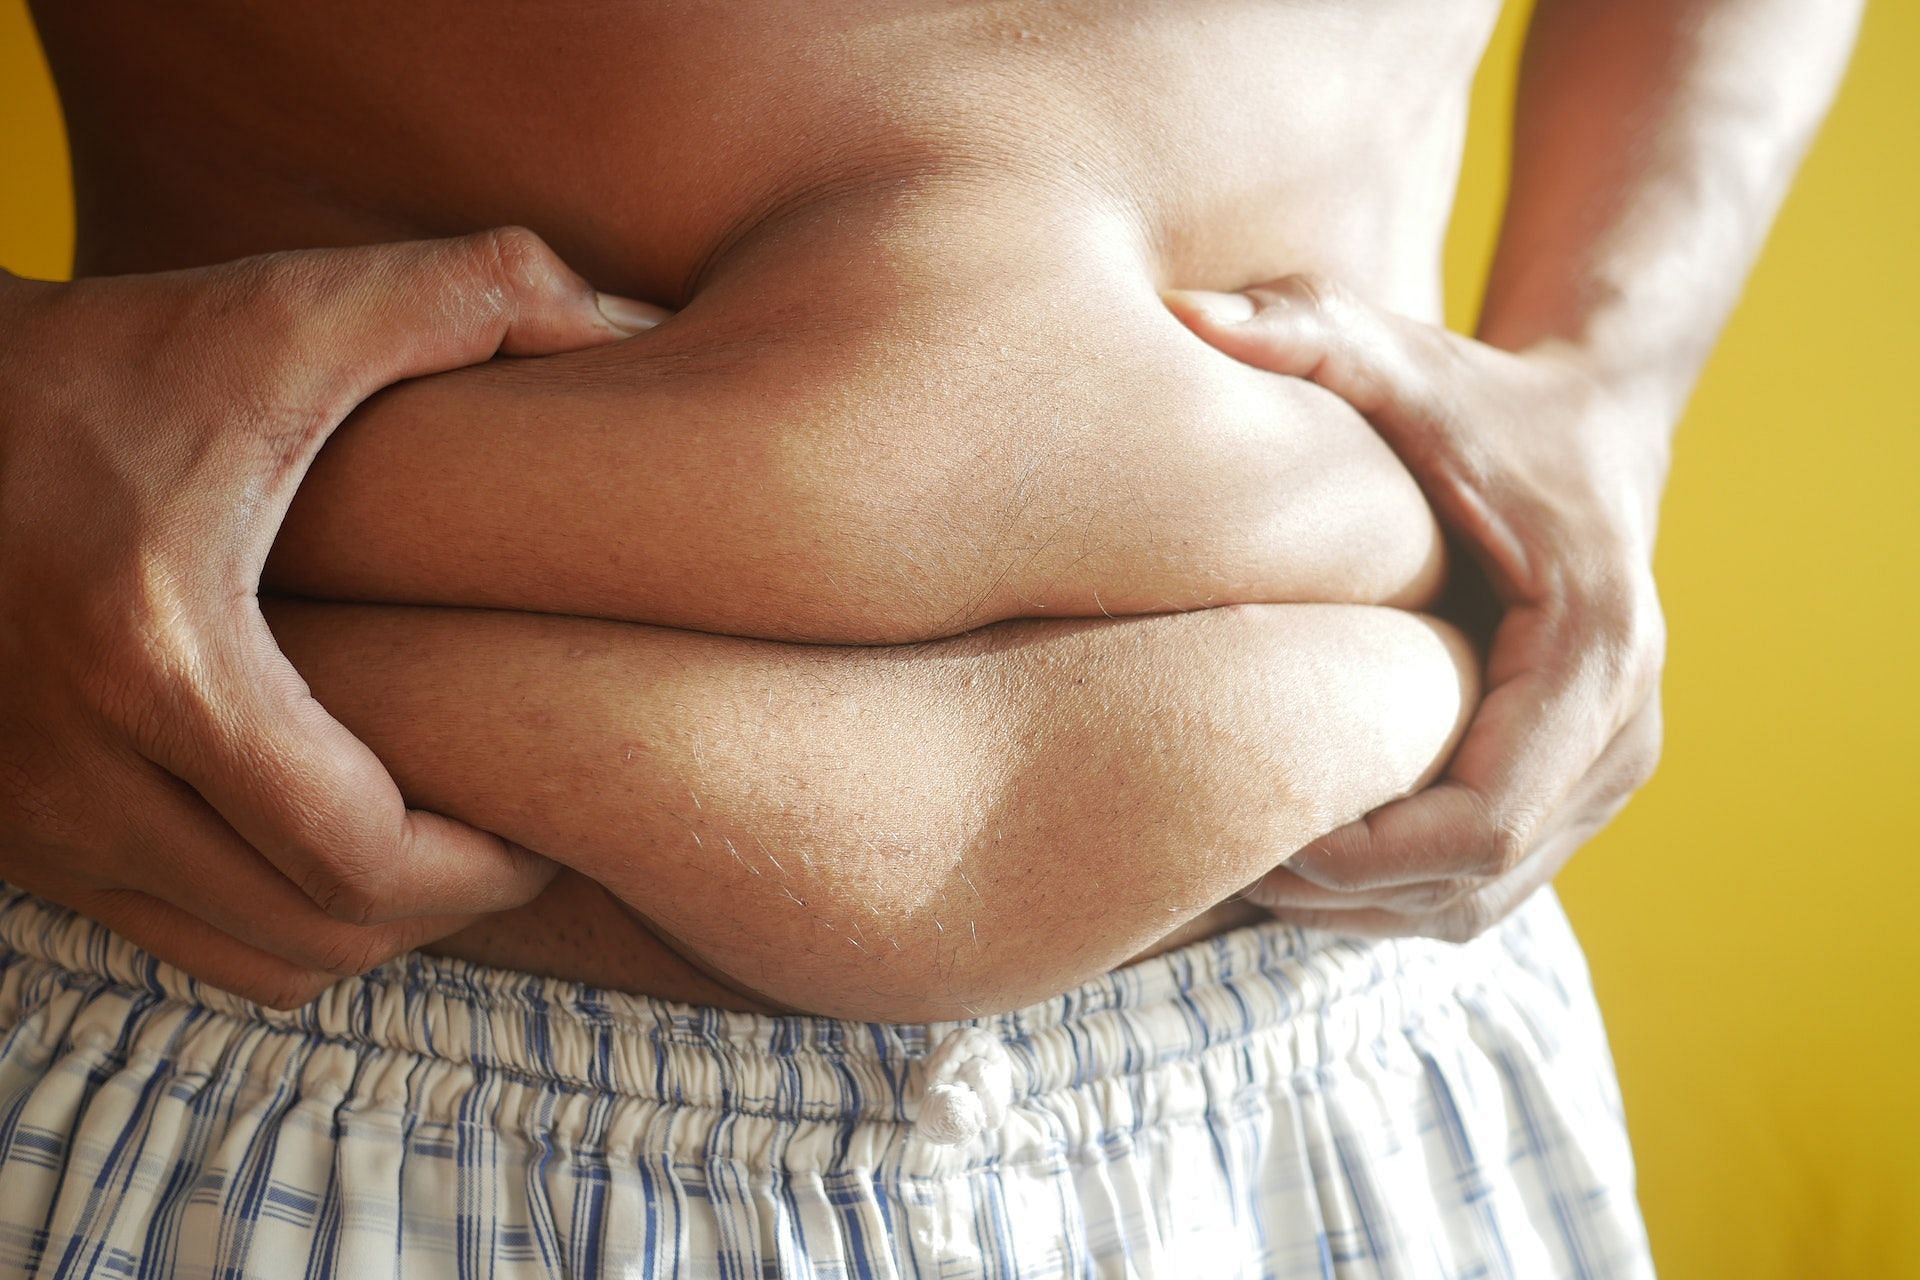 Stress belly is a common condition. (Photo via Pexels/Towfiqu barbhuiya)